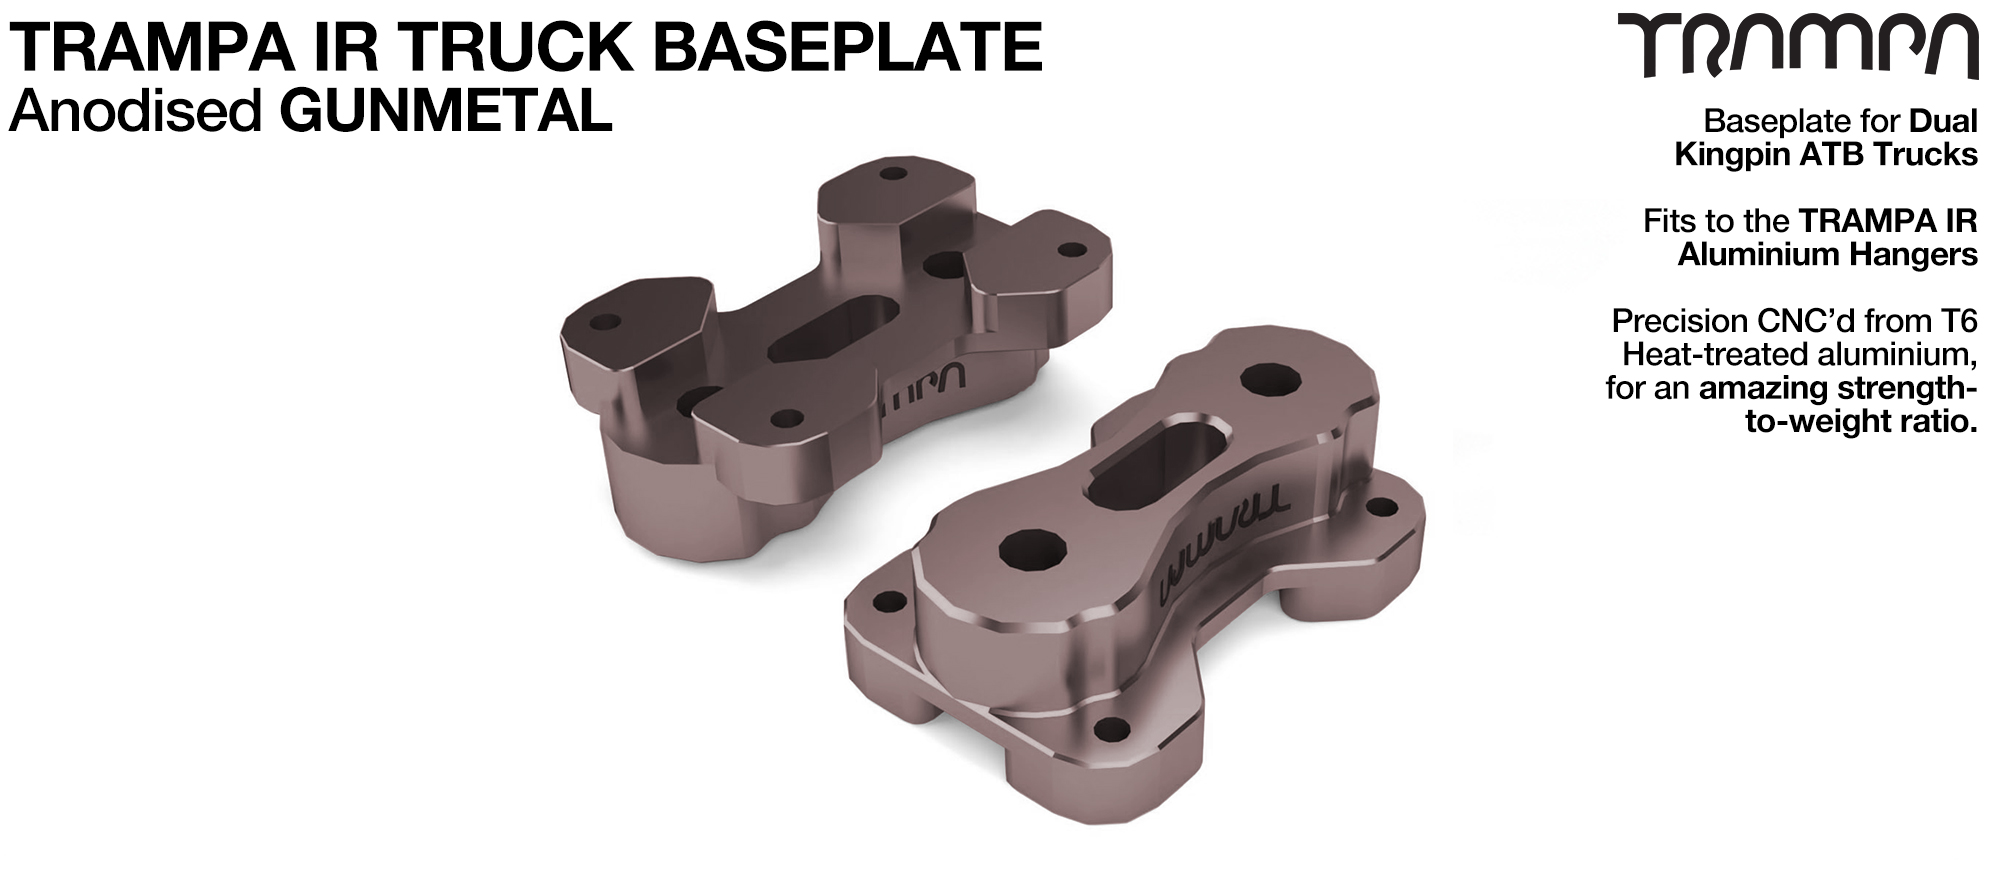 TRAMPA IR BASEPLATE - CNC Precision made TRAMPA IR Trucks are super light & Packed with performance - GUNMETAL